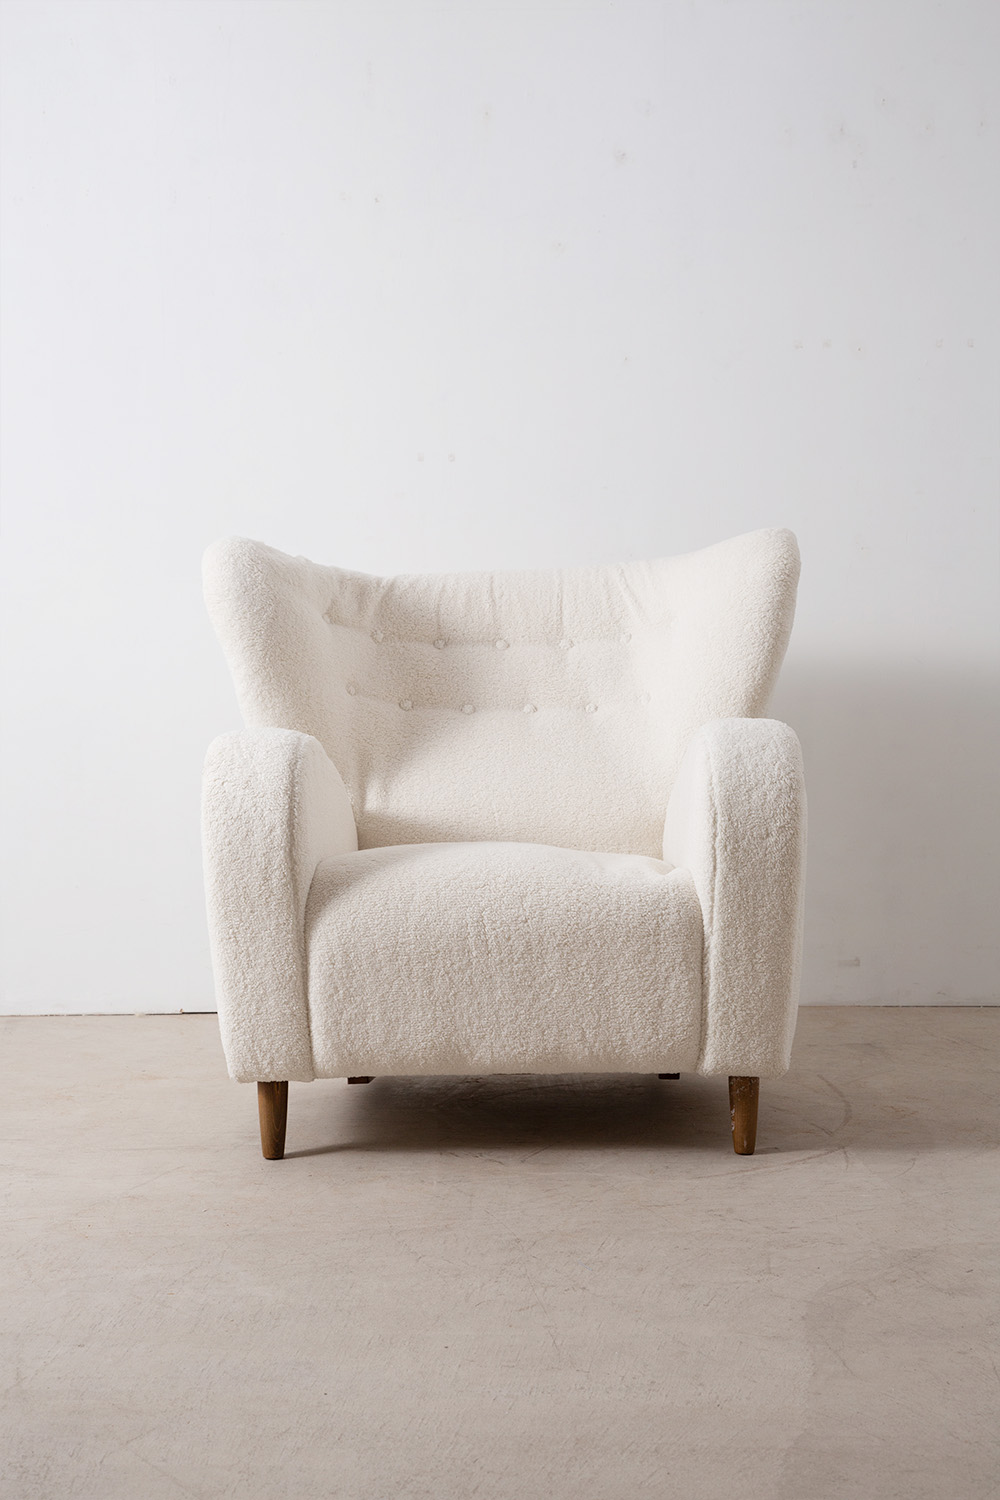 stoop | Italian Vintage Lounge Chair in Fabric and Wood